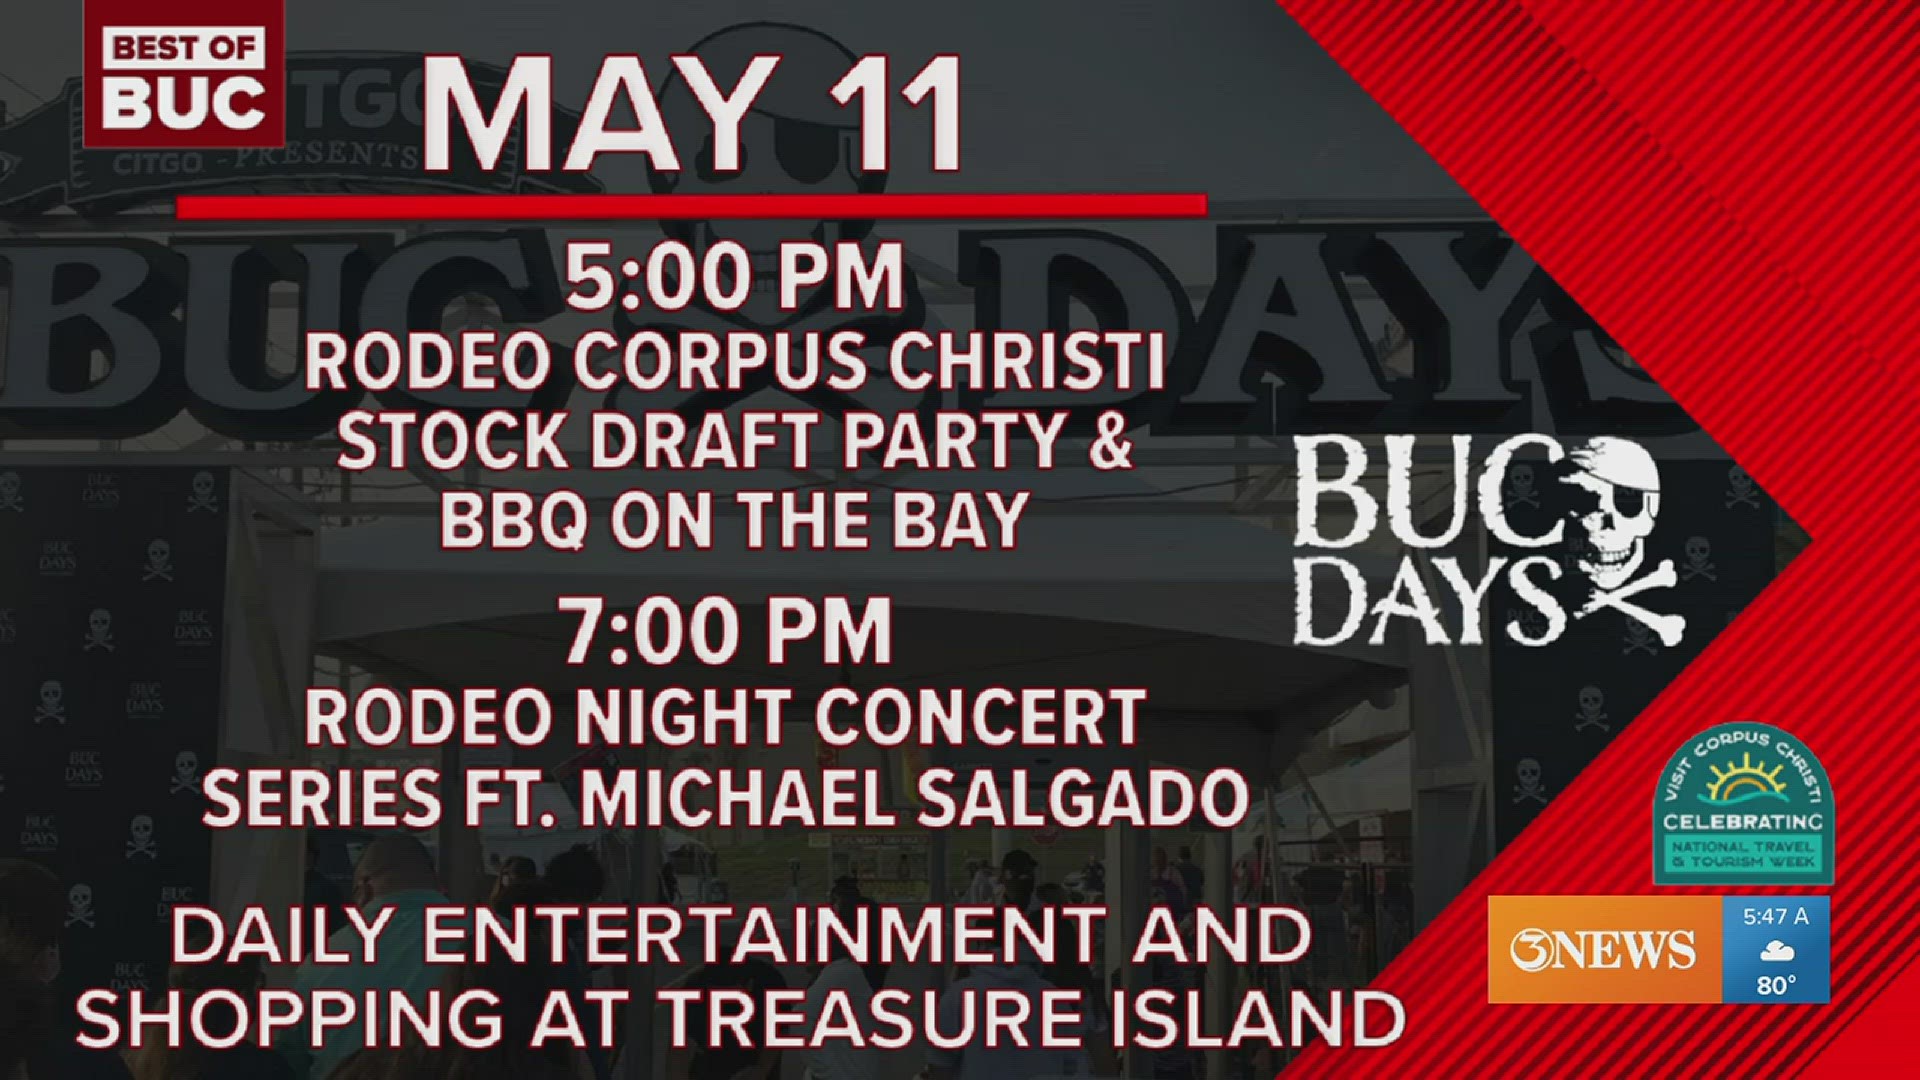 Rodeo Corpus Christi ends tonight with a performance by Michael Salgado!